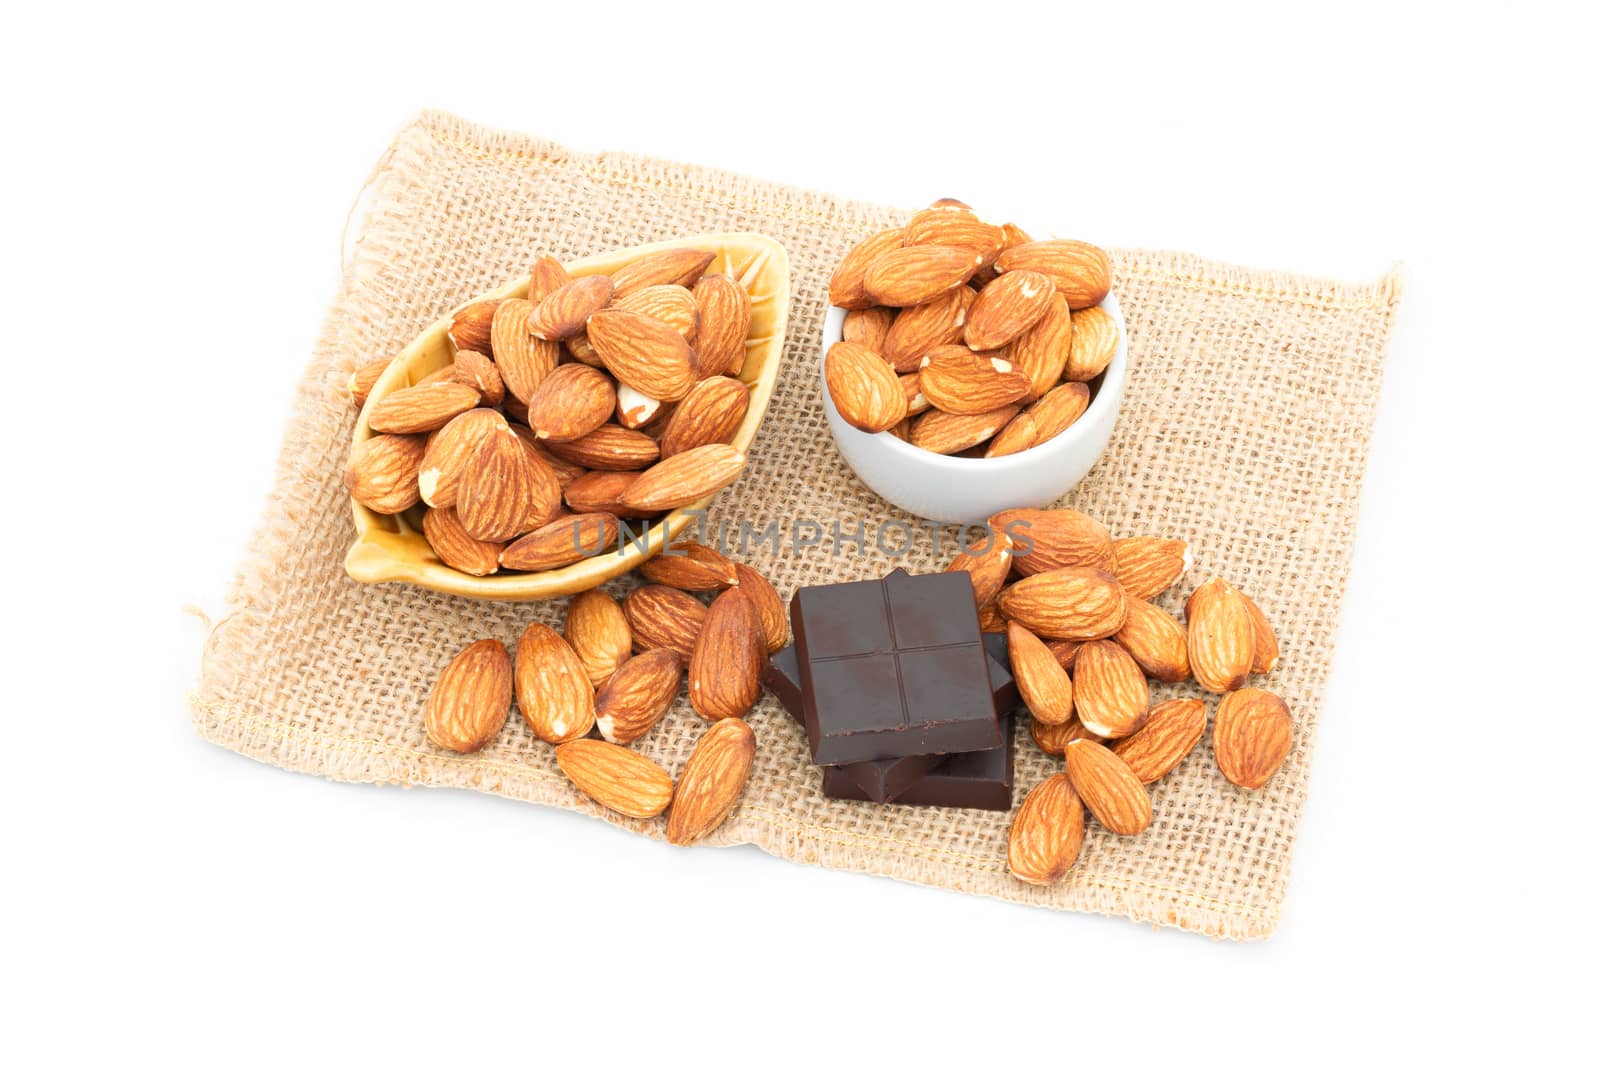 chocolate and almonds on a white background by sompongtom